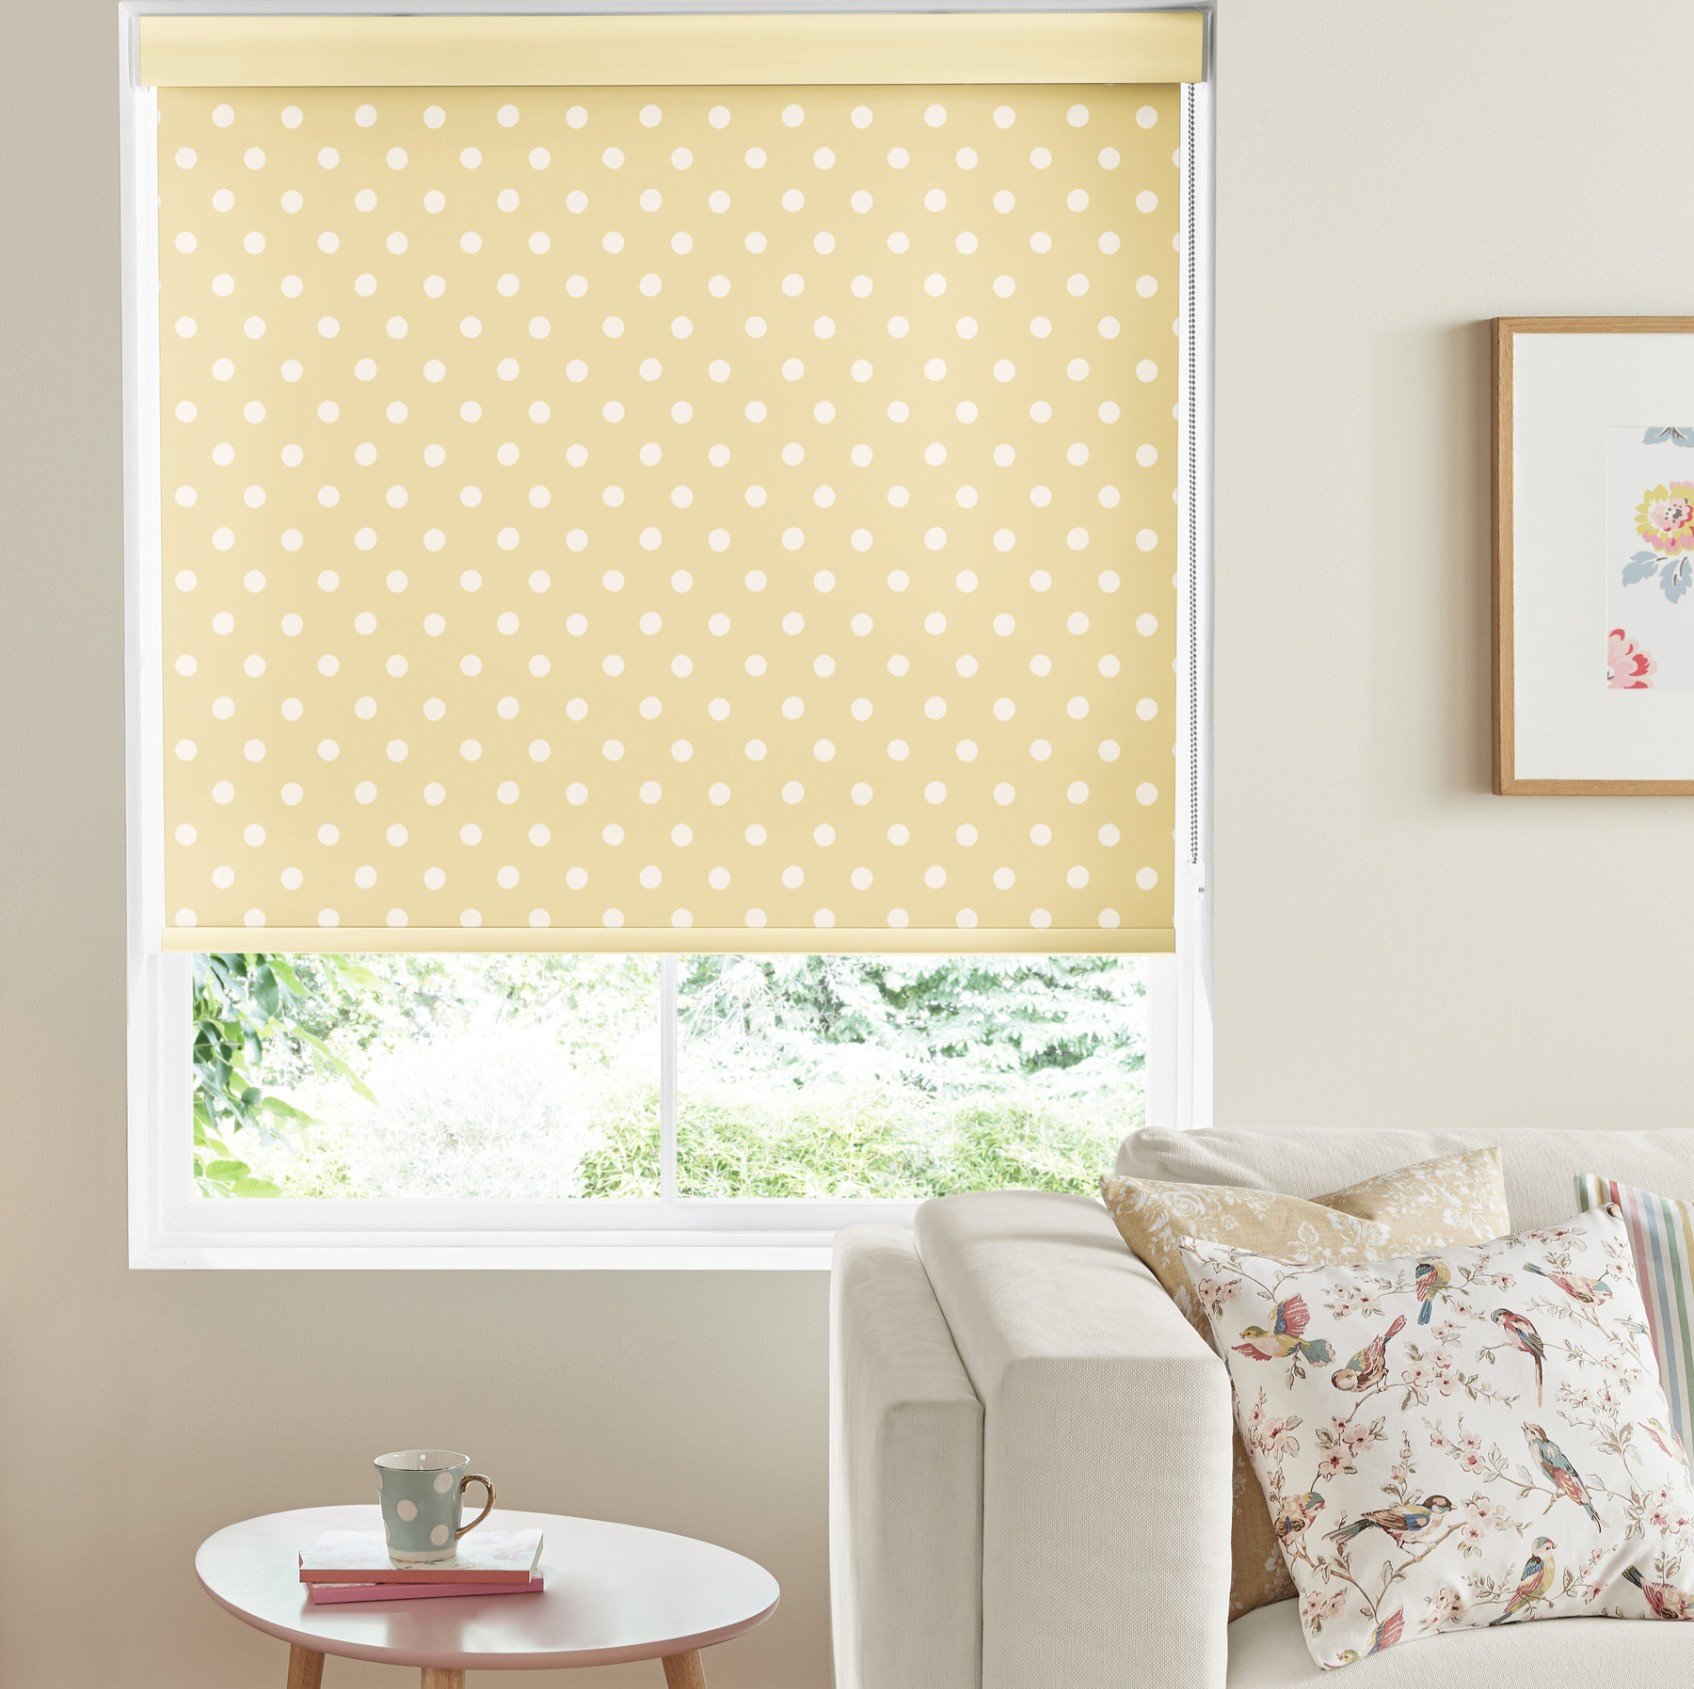 Cath Kidston Button Spot Yellow Dimout Roller Blind